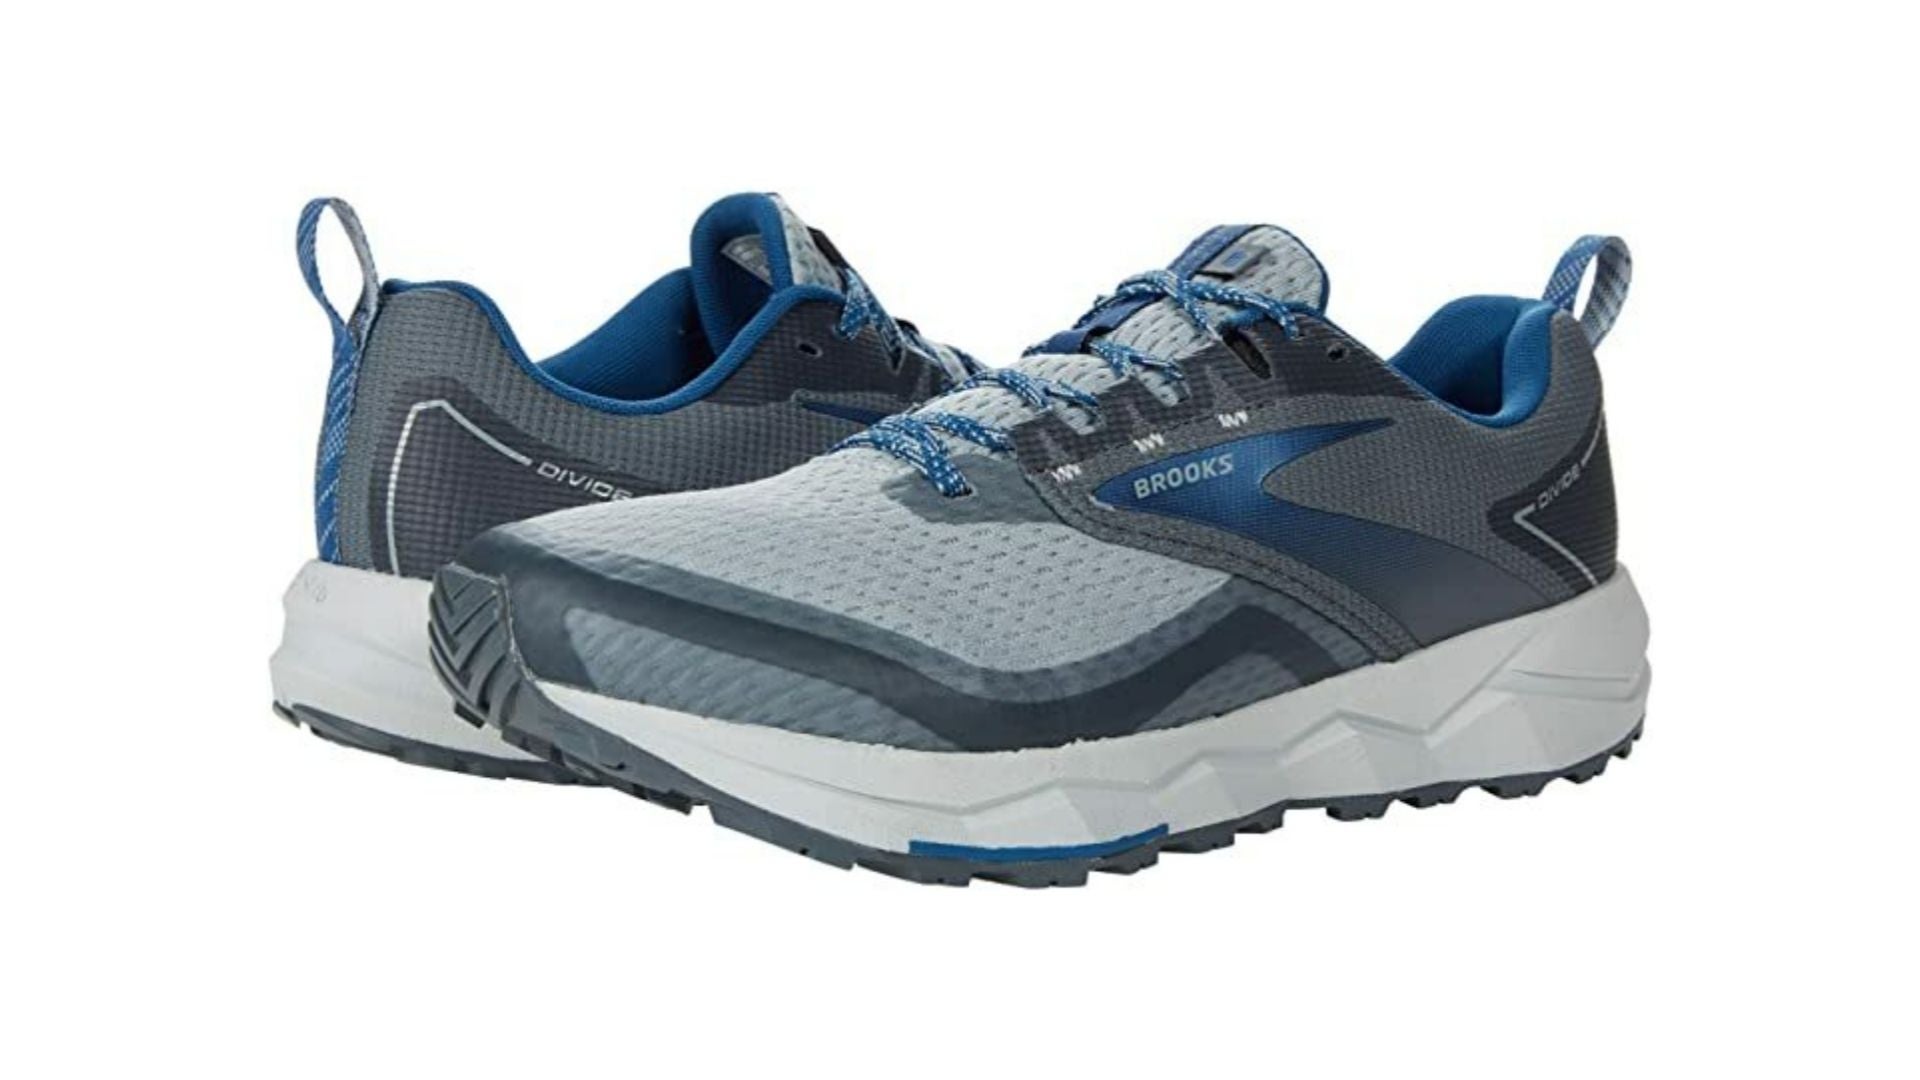 fear gown fatigue Best Trail Running Shoes (Review & Buying Guide) 2021 - Task & Purpose